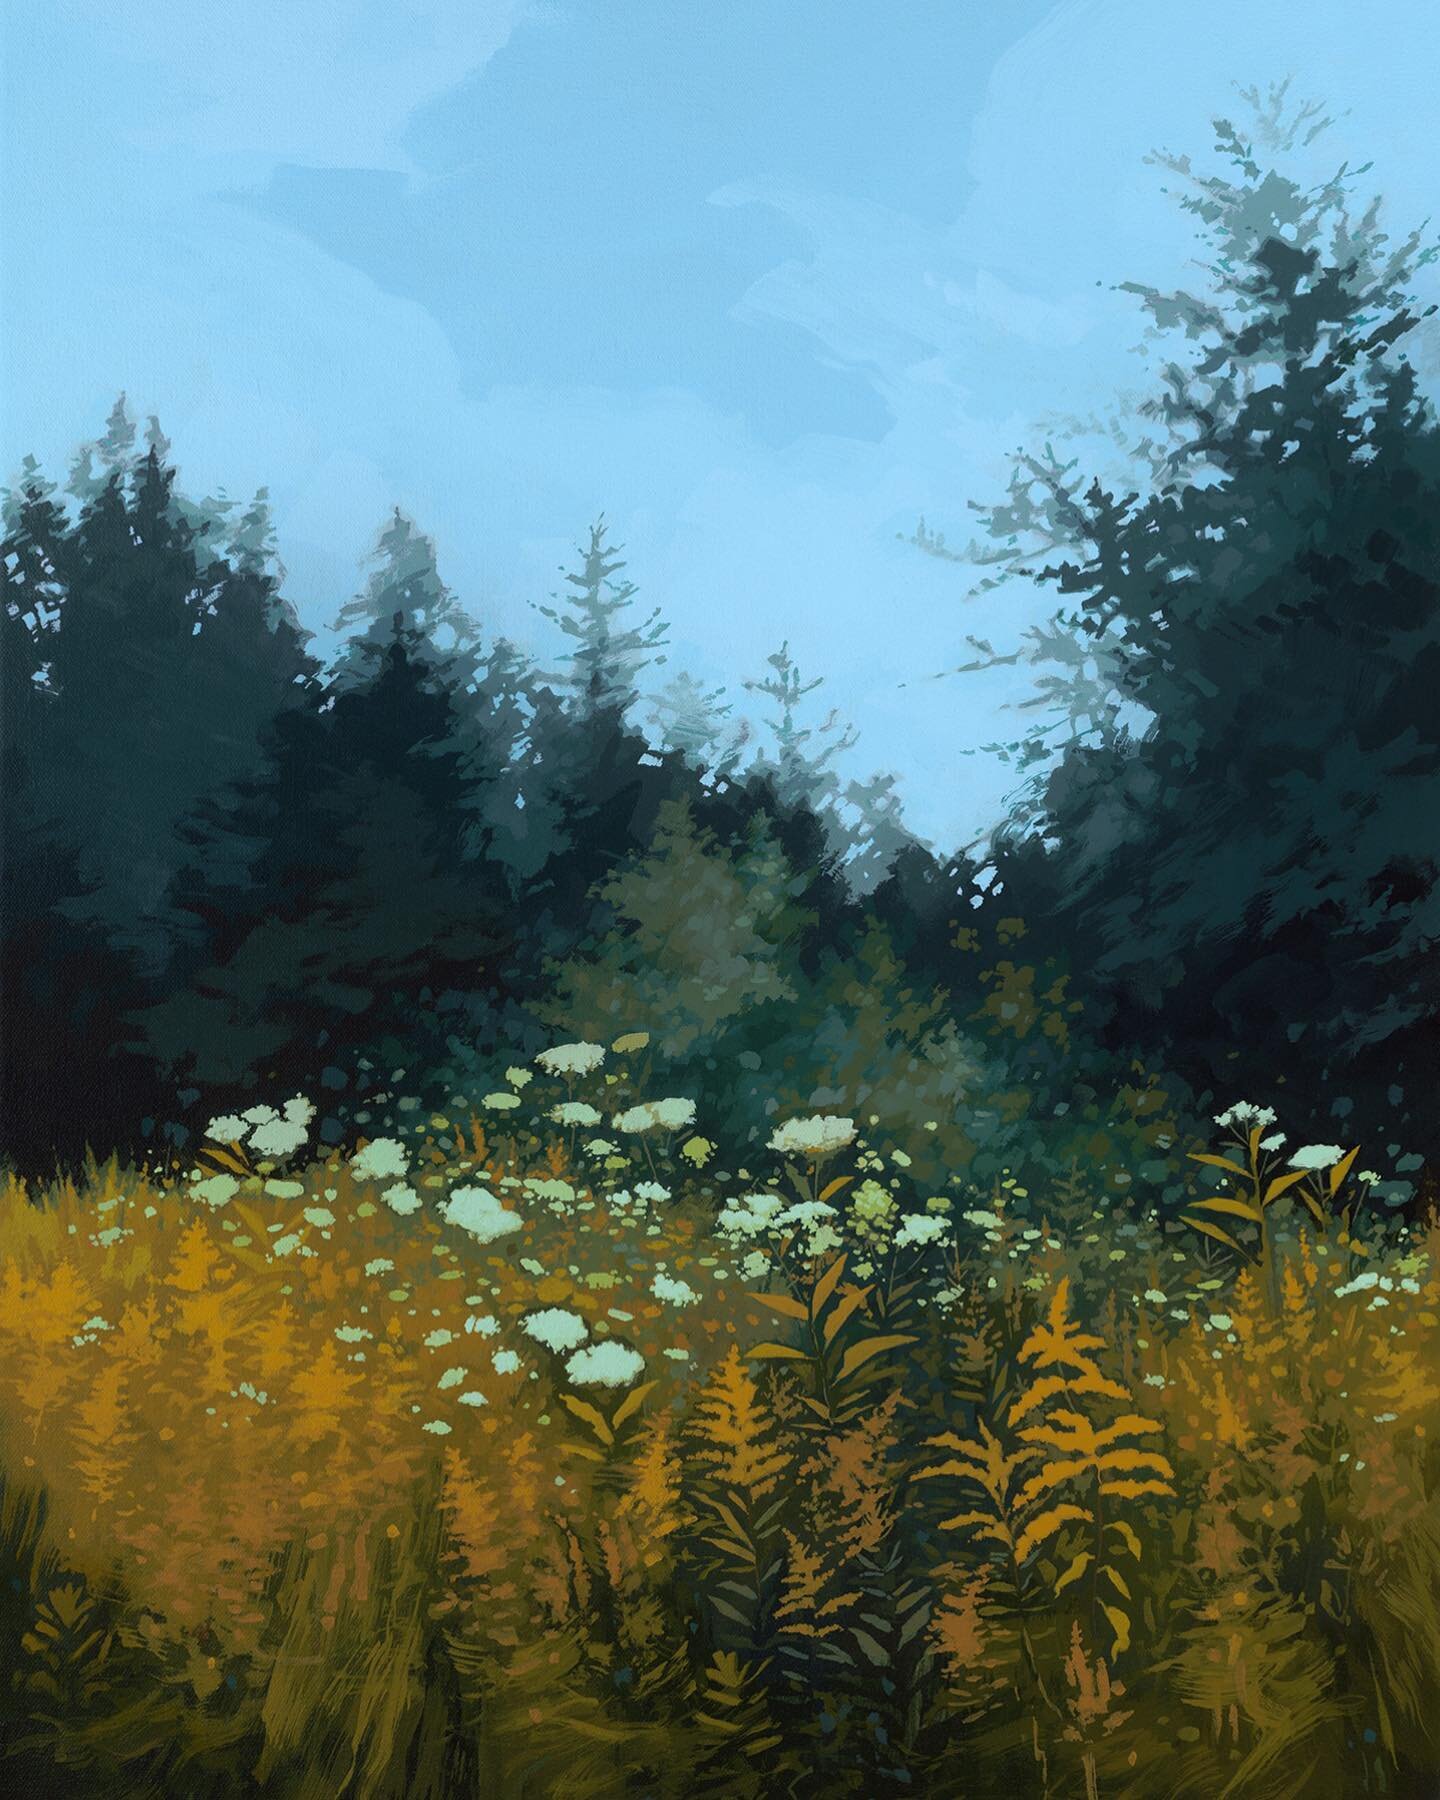 ✨New print coming in early October✨ 

This is an early heads up that September&rsquo;s painting in the 2022 seasonal flowers calendar will be released as a gicle&eacute; fine art print in early October! This will be the first print I&rsquo;m offering